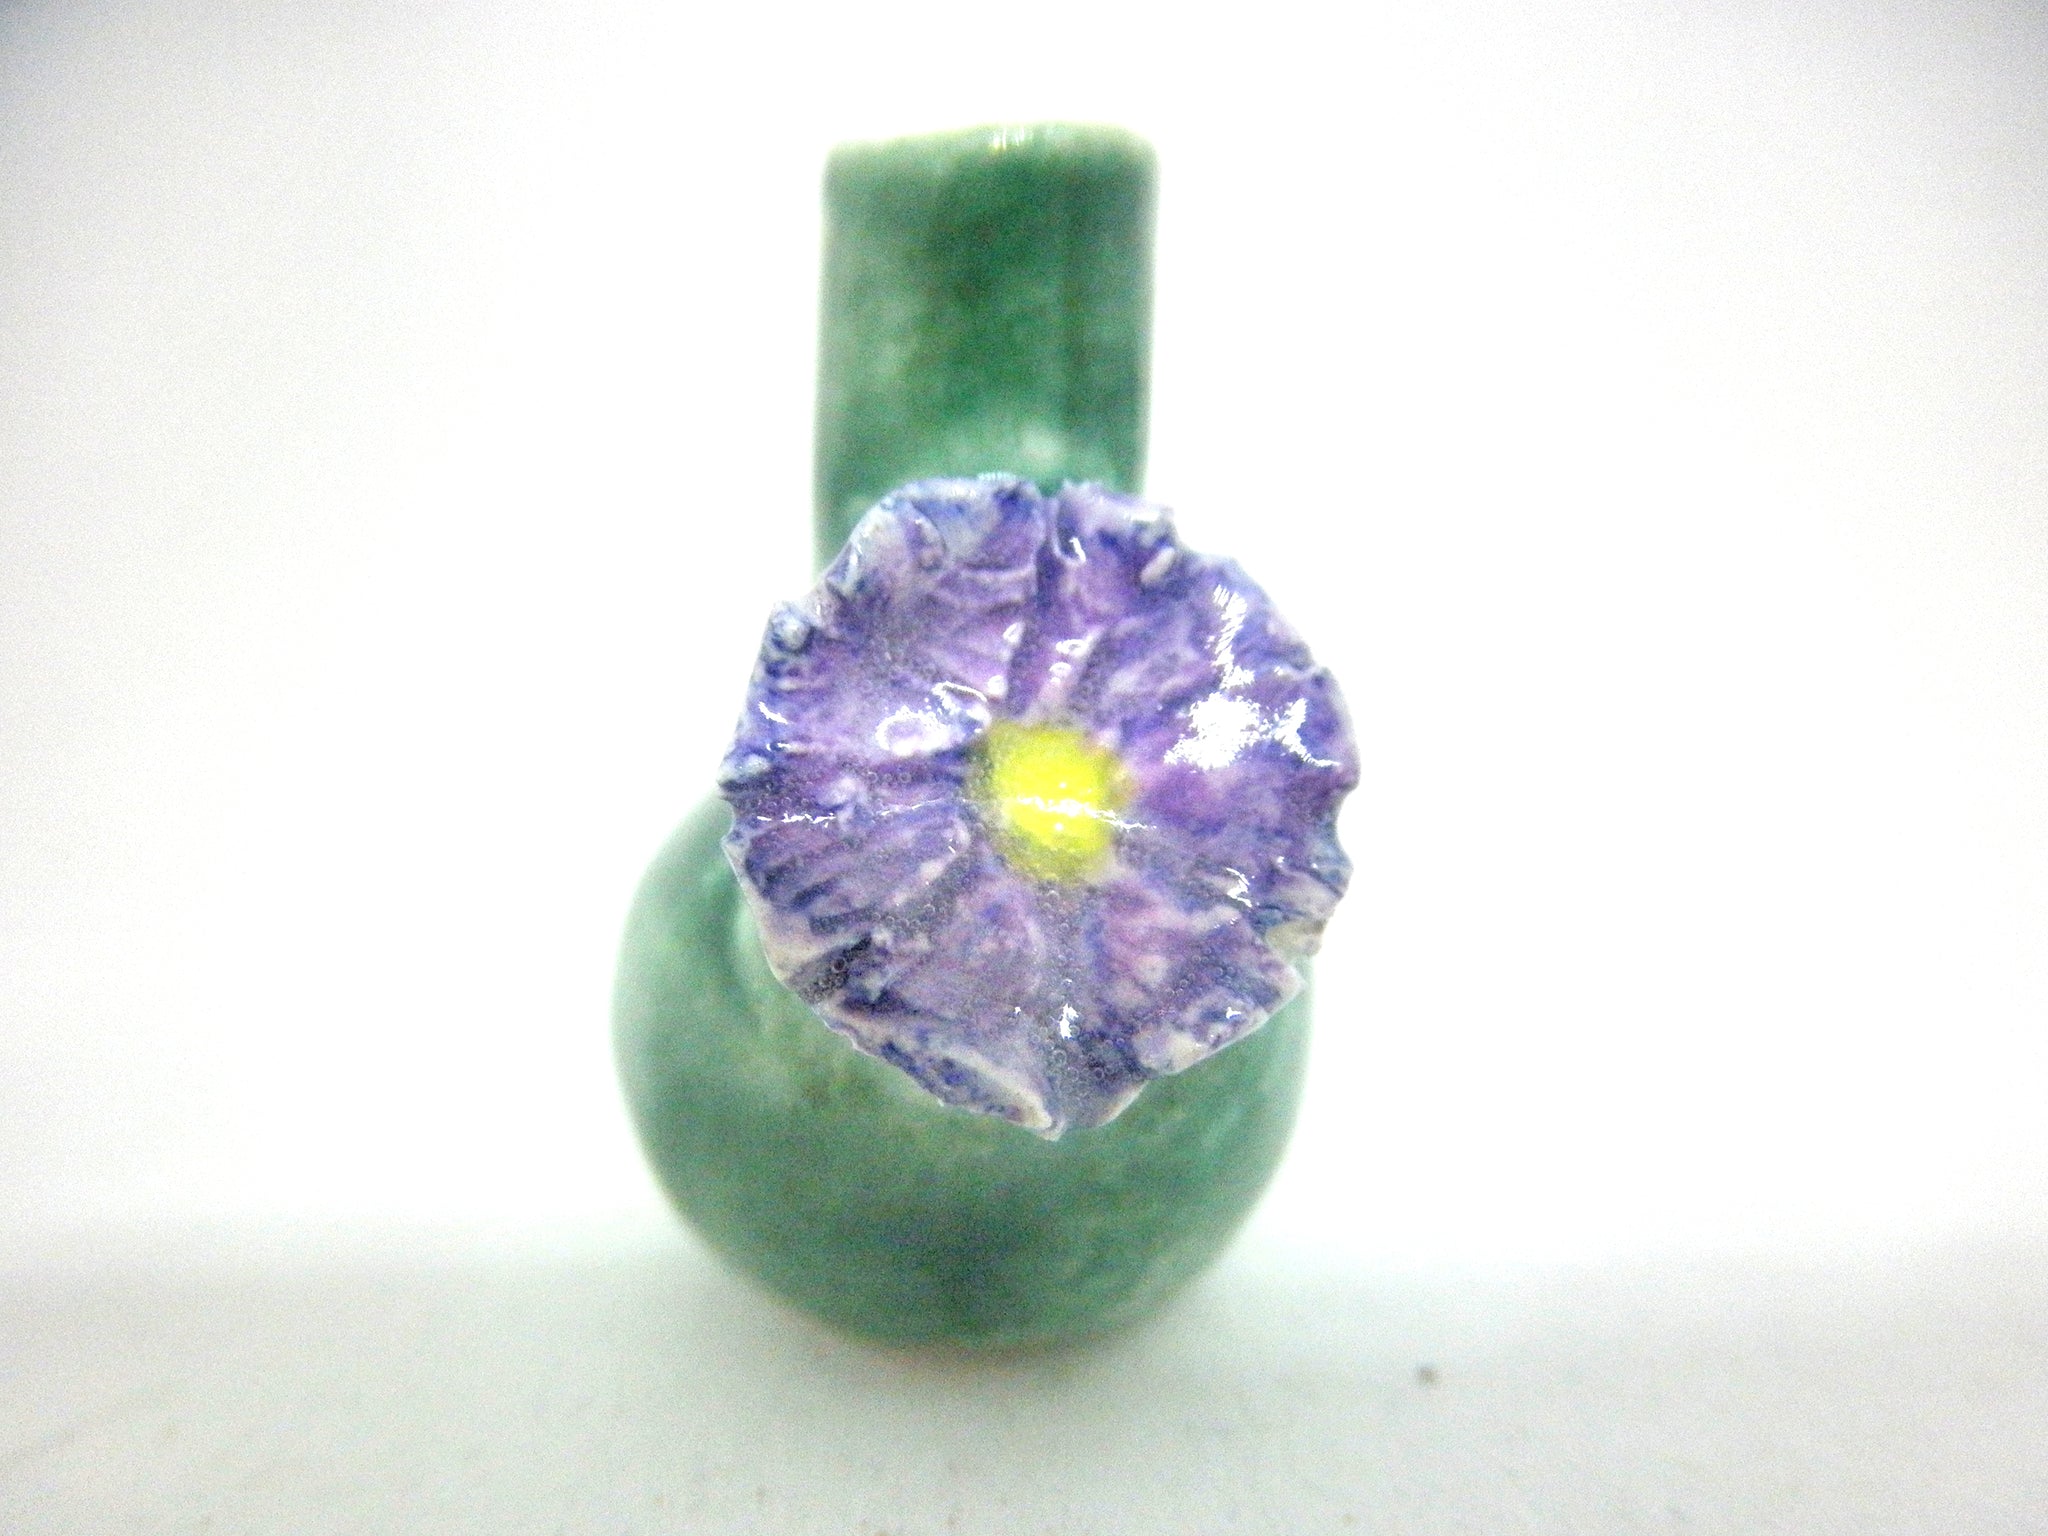 Miniature ceramic vase green with morning glory